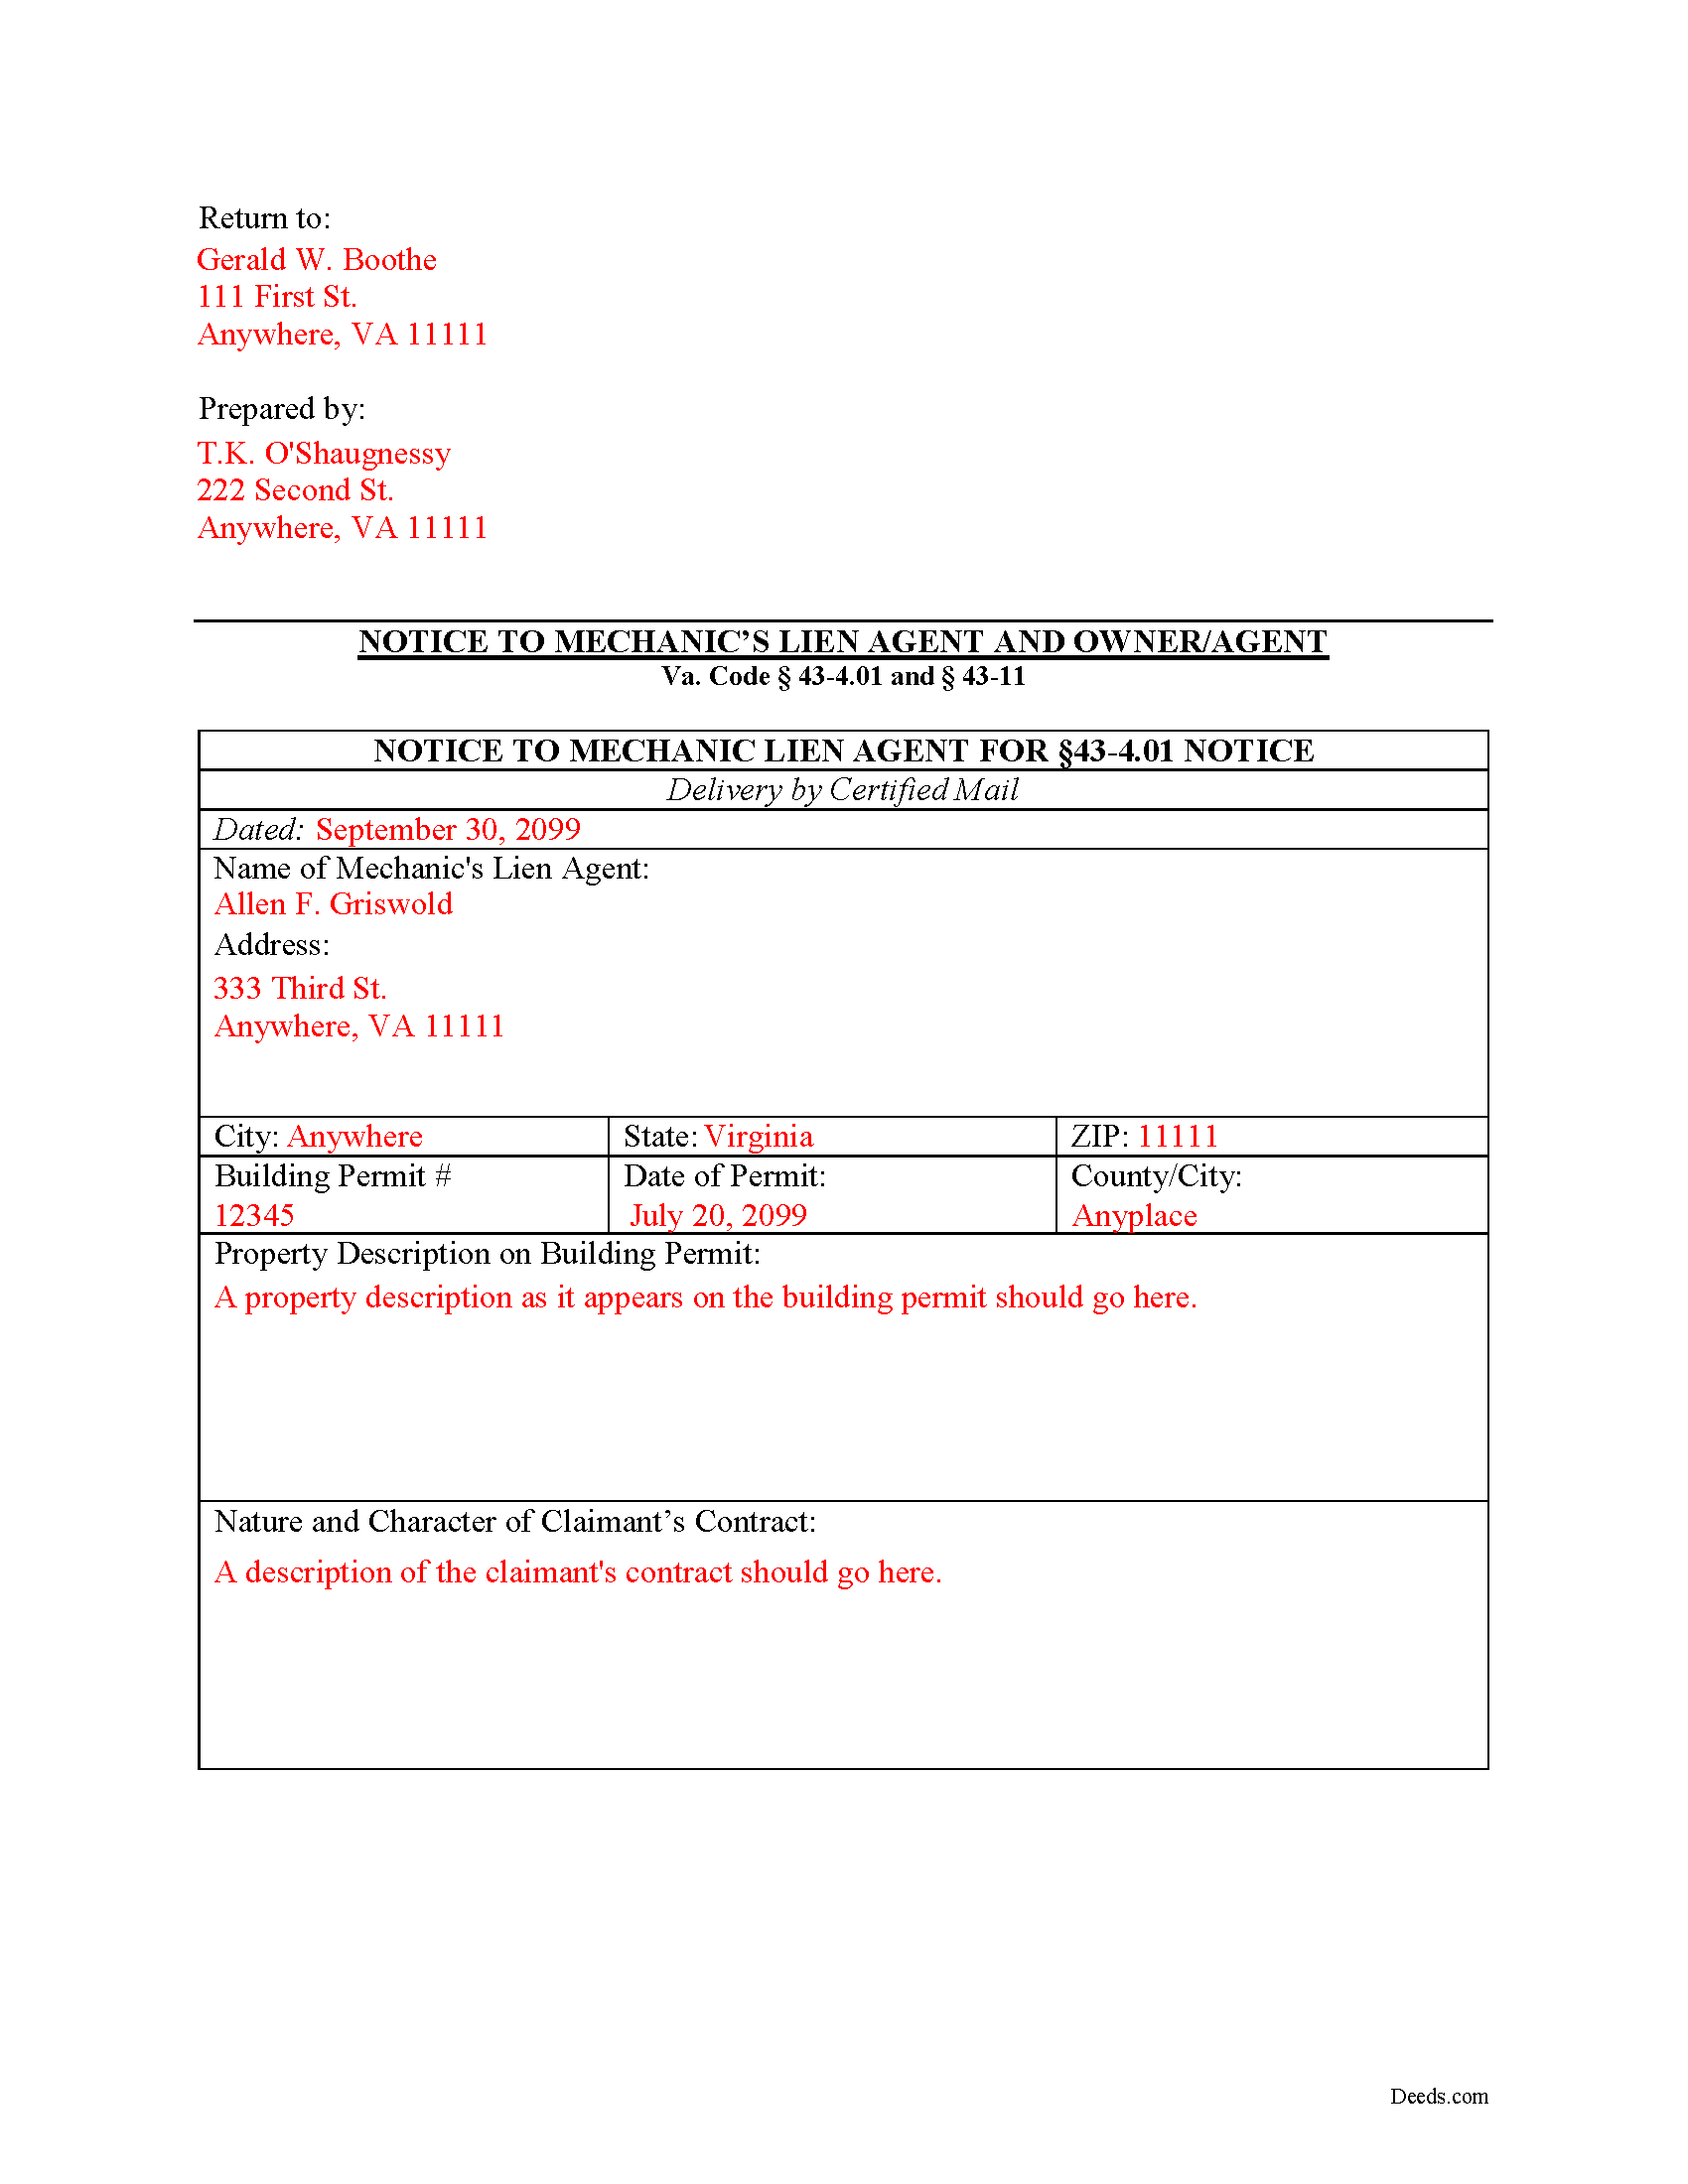 Completed Example of the Preliminary Notice to Owner Document